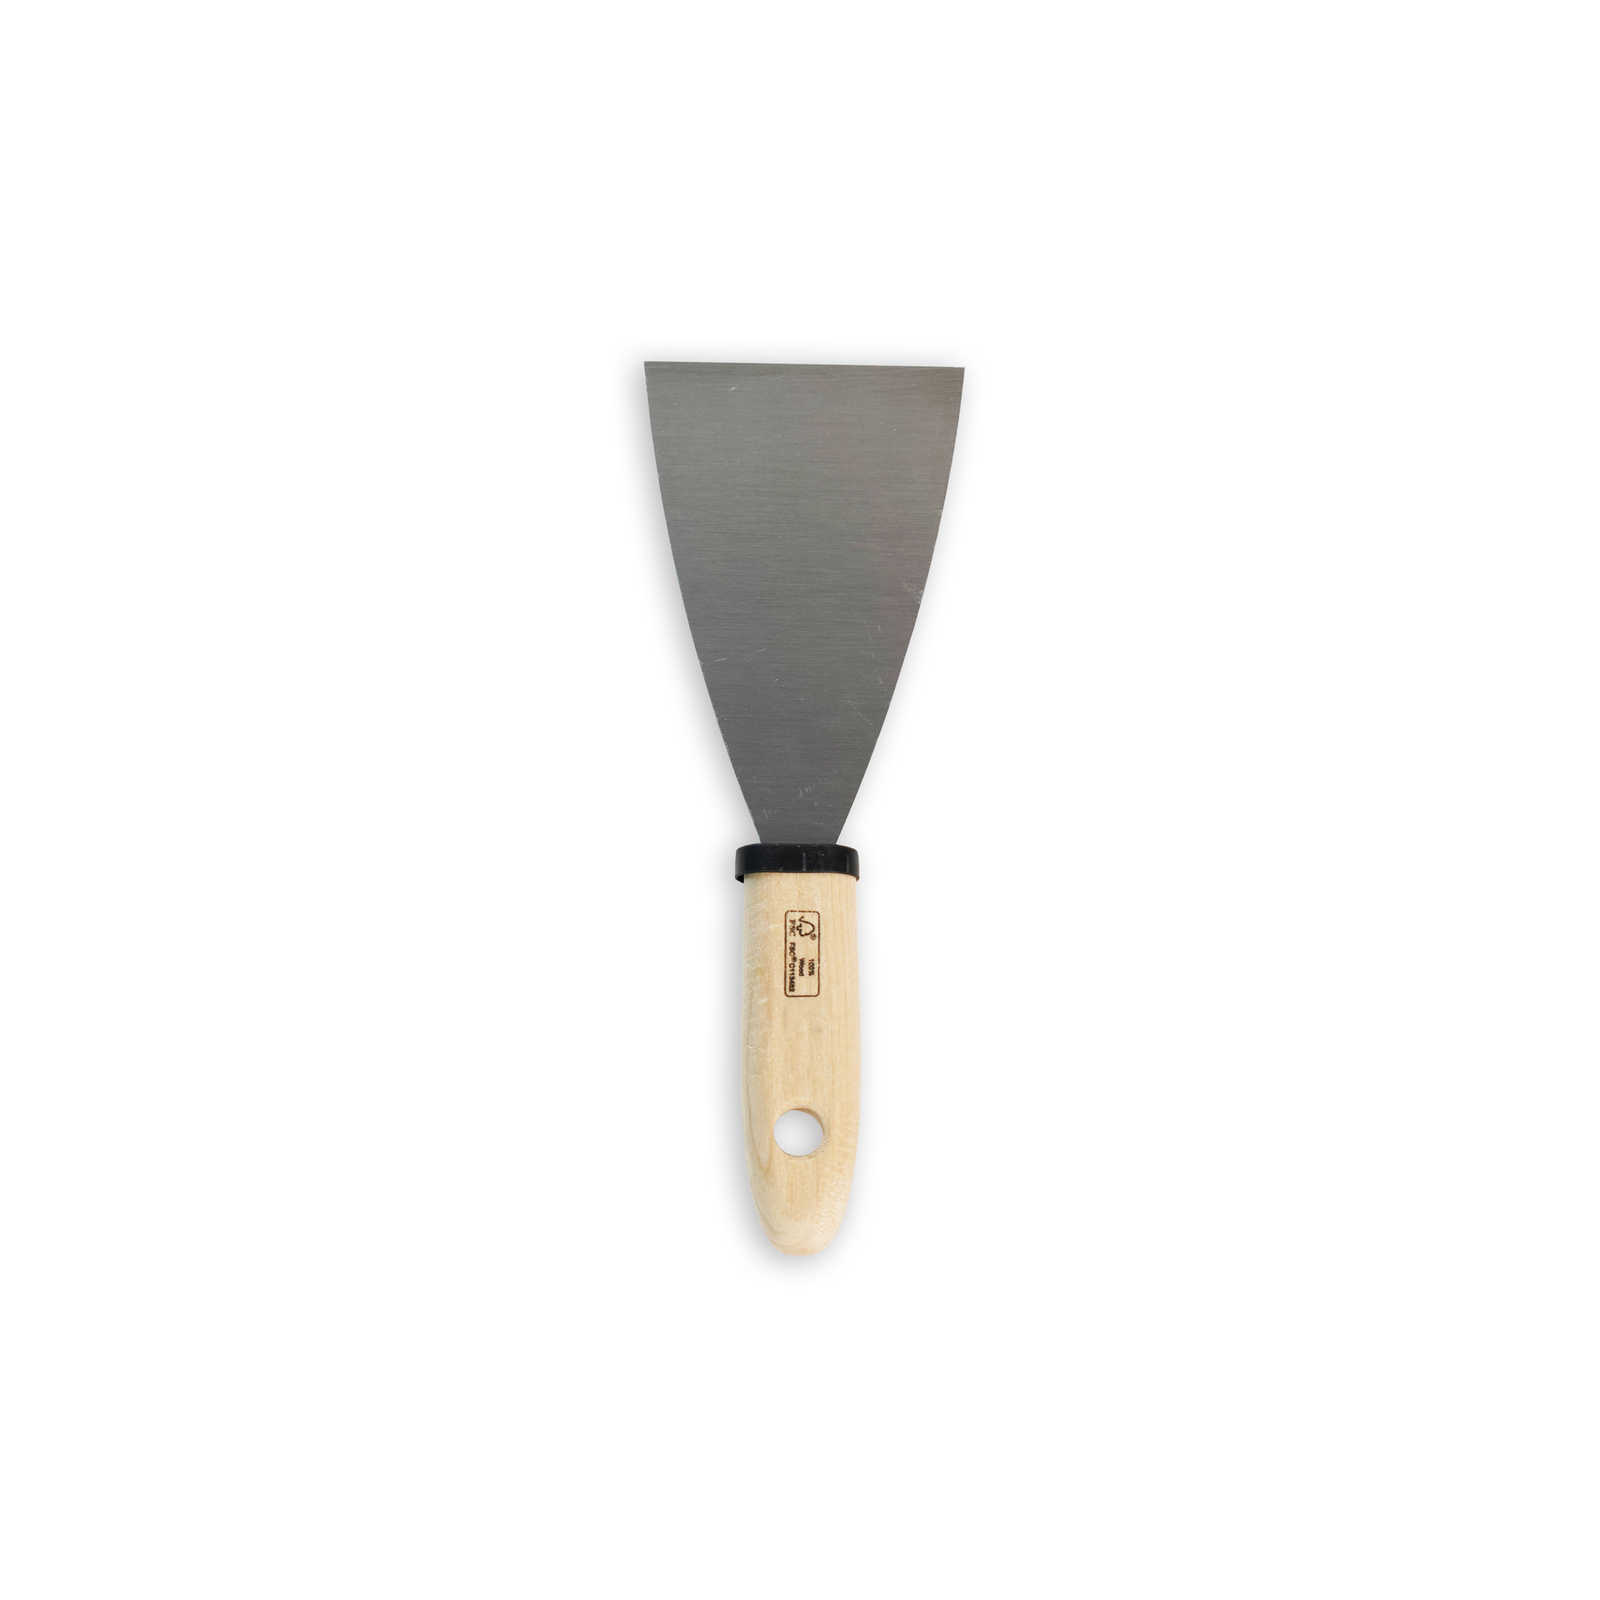         Painter spatula 80mm with flexible steel blade & wooden handle
    